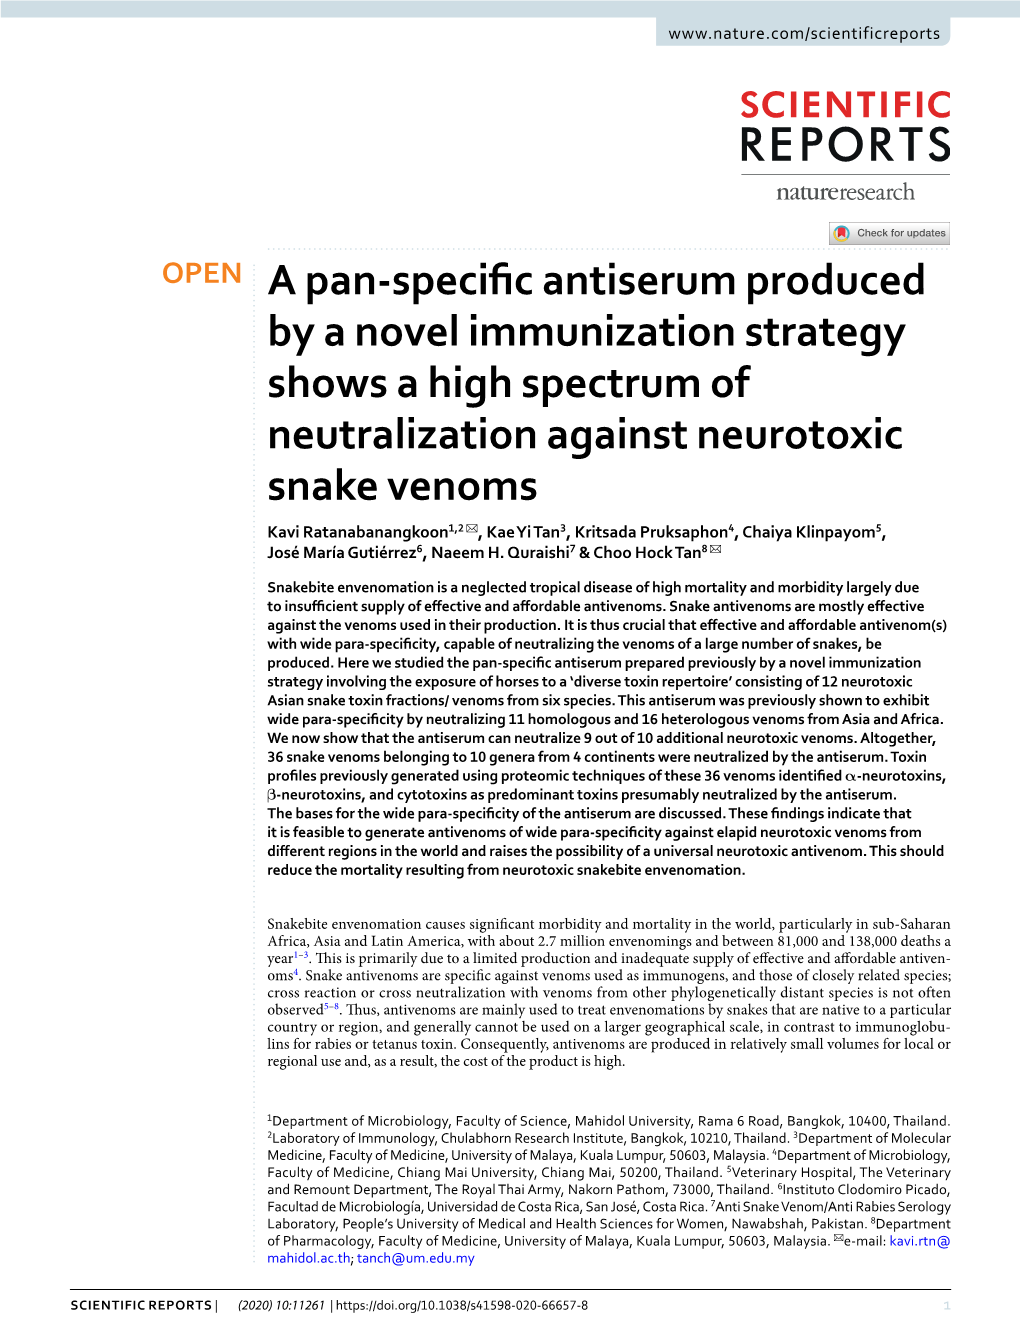 A Pan-Specific Antiserum Produced by a Novel Immunization Strategy